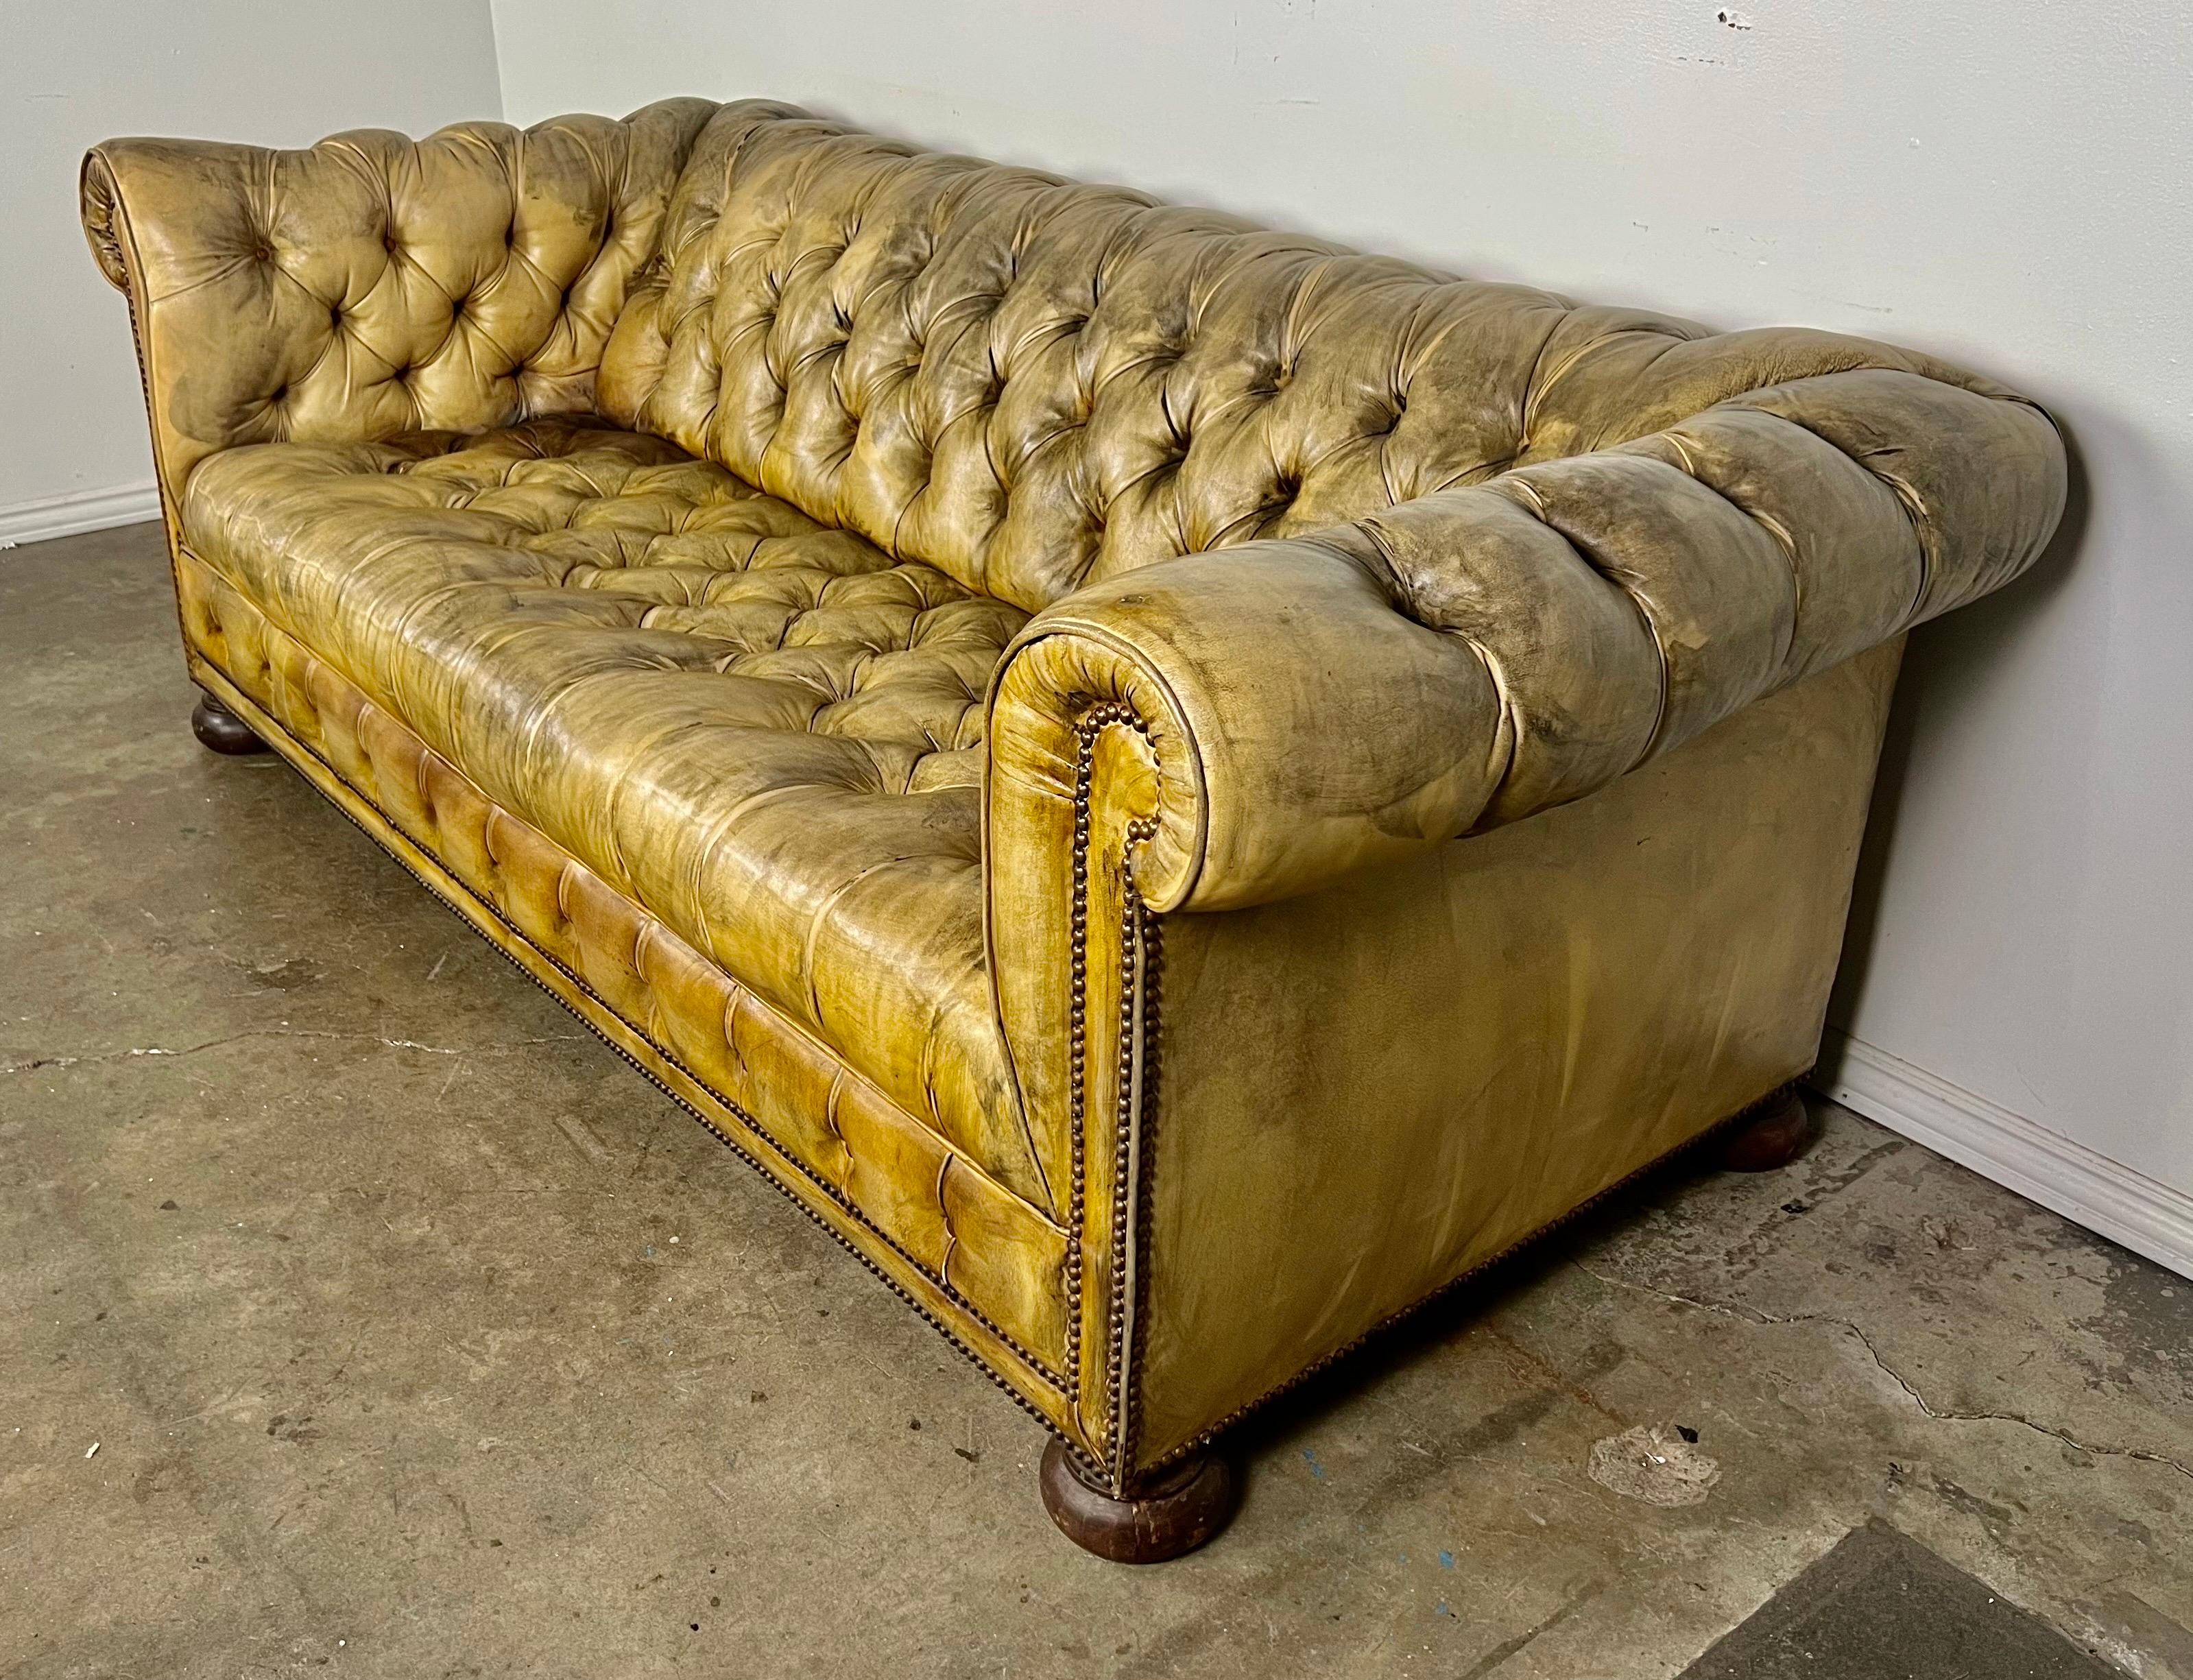 Vintage English Chesterfield Style Leather Tufted Sofa C. 1920's For Sale 3